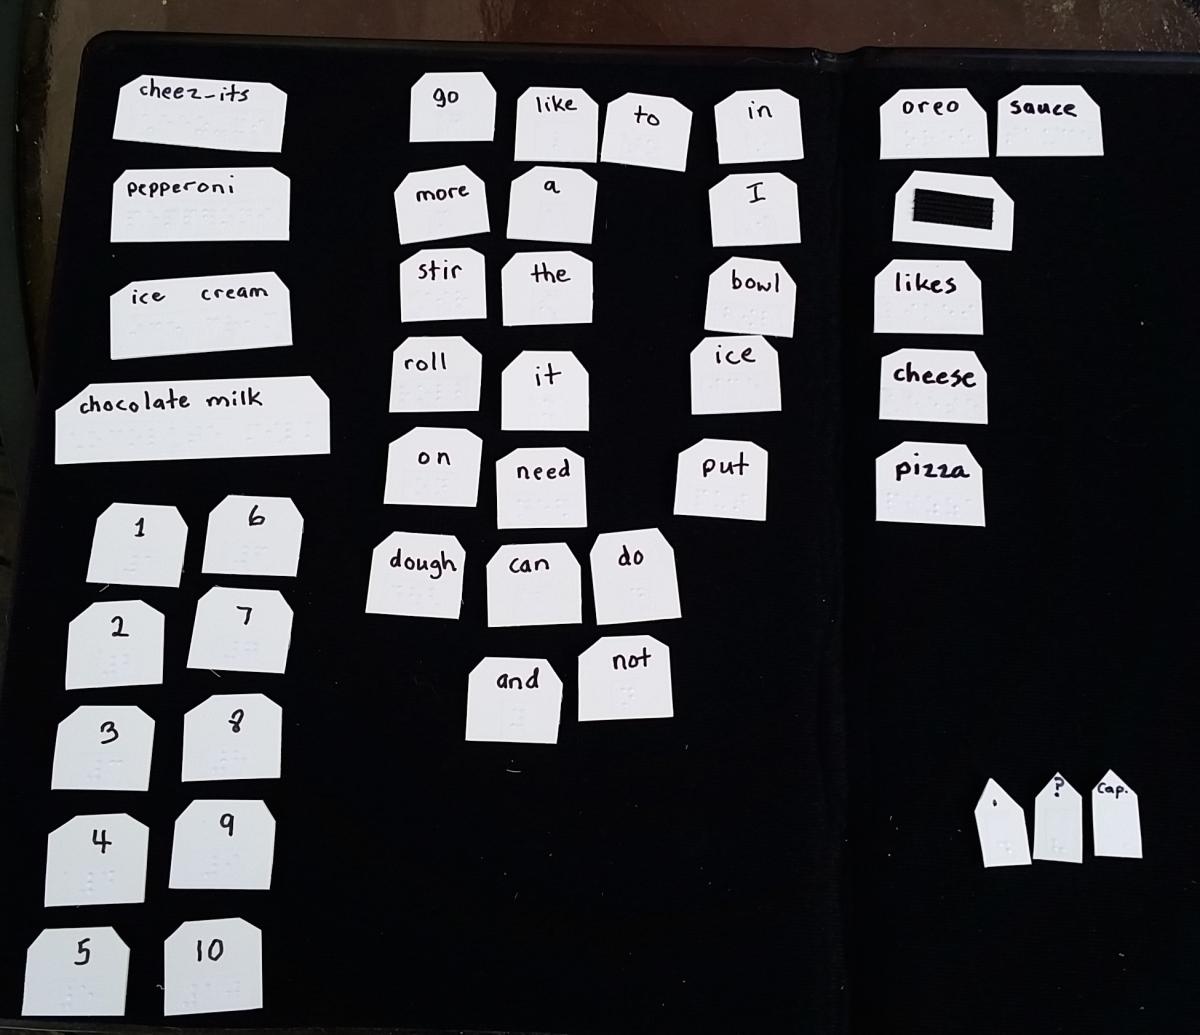 All of the student’s braille word tiles are on a black felt board from APH.